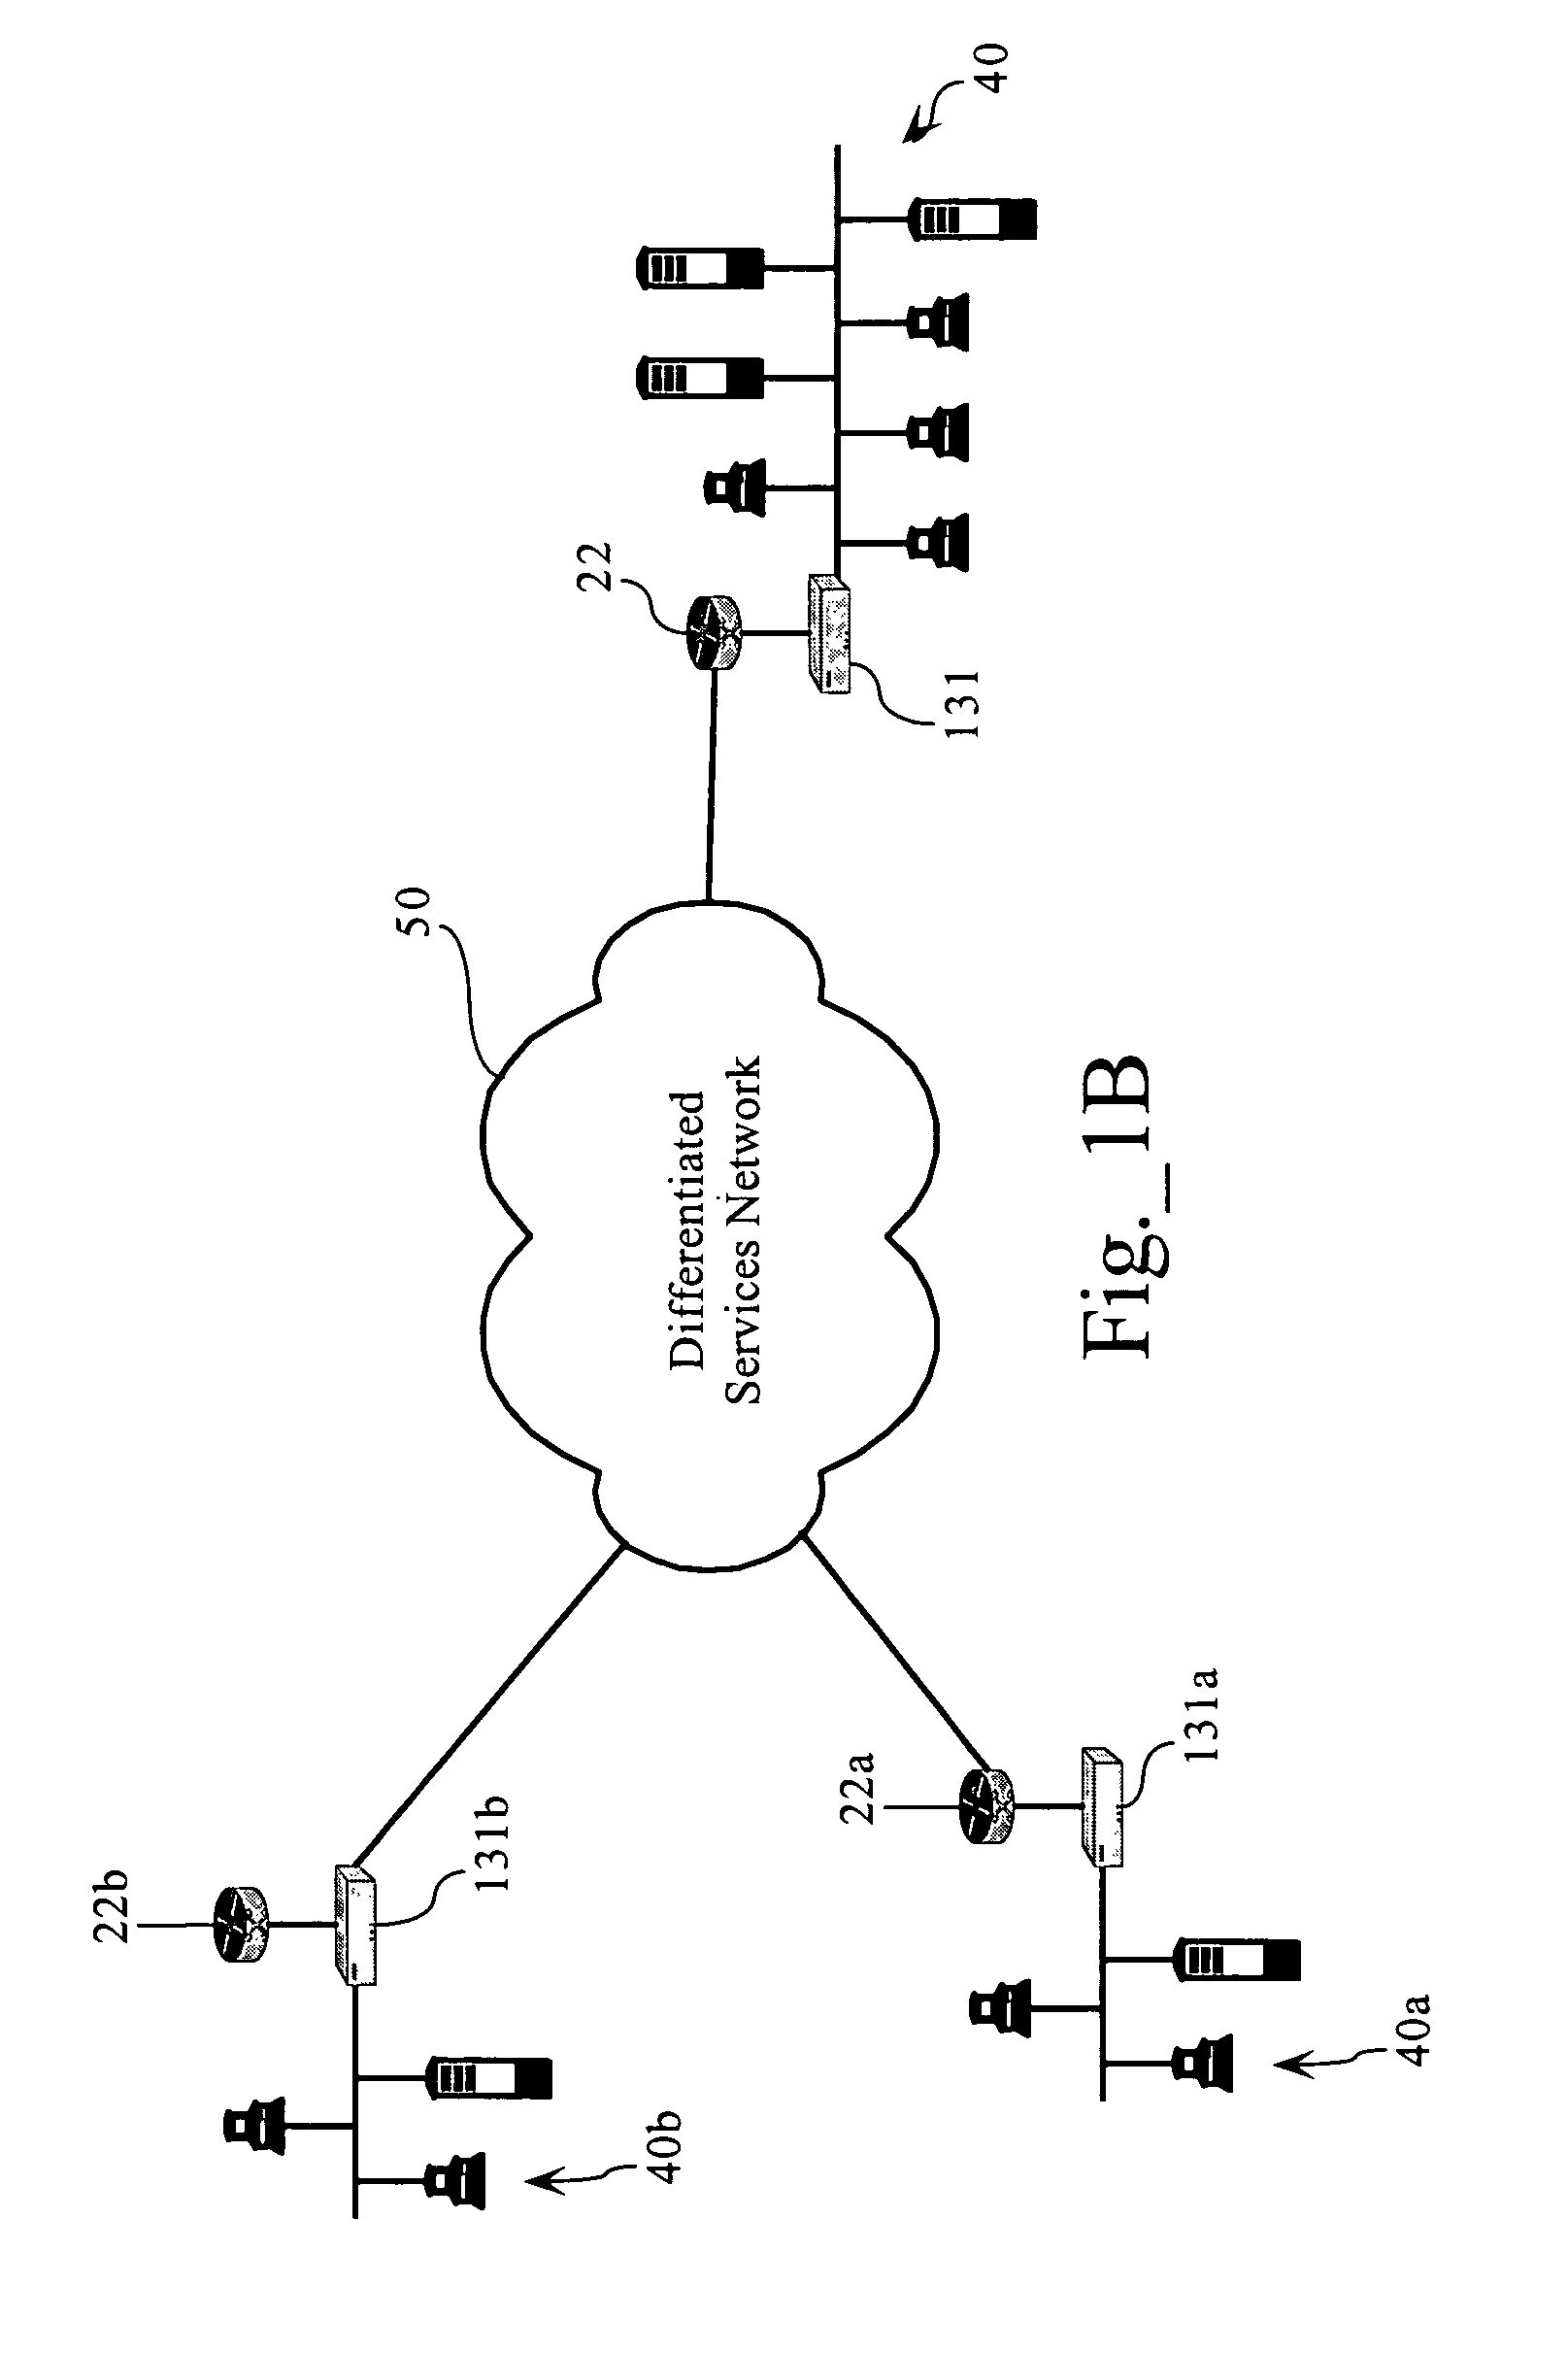 Adaptive, application-aware selection of differntiated network services